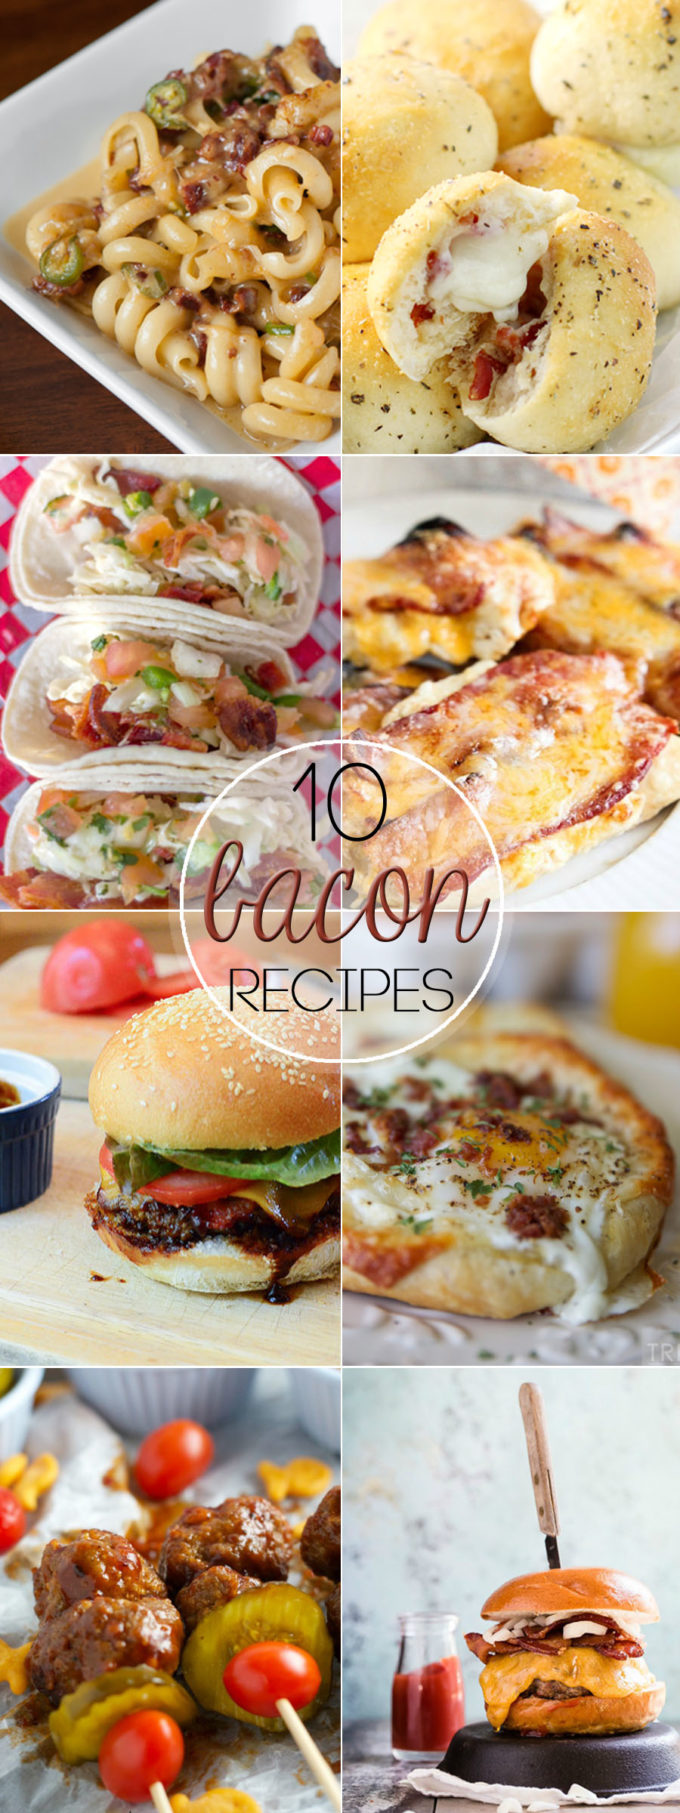 10 bacon recipes that will make you want to run out and butcher a pig just so you can make them all. 